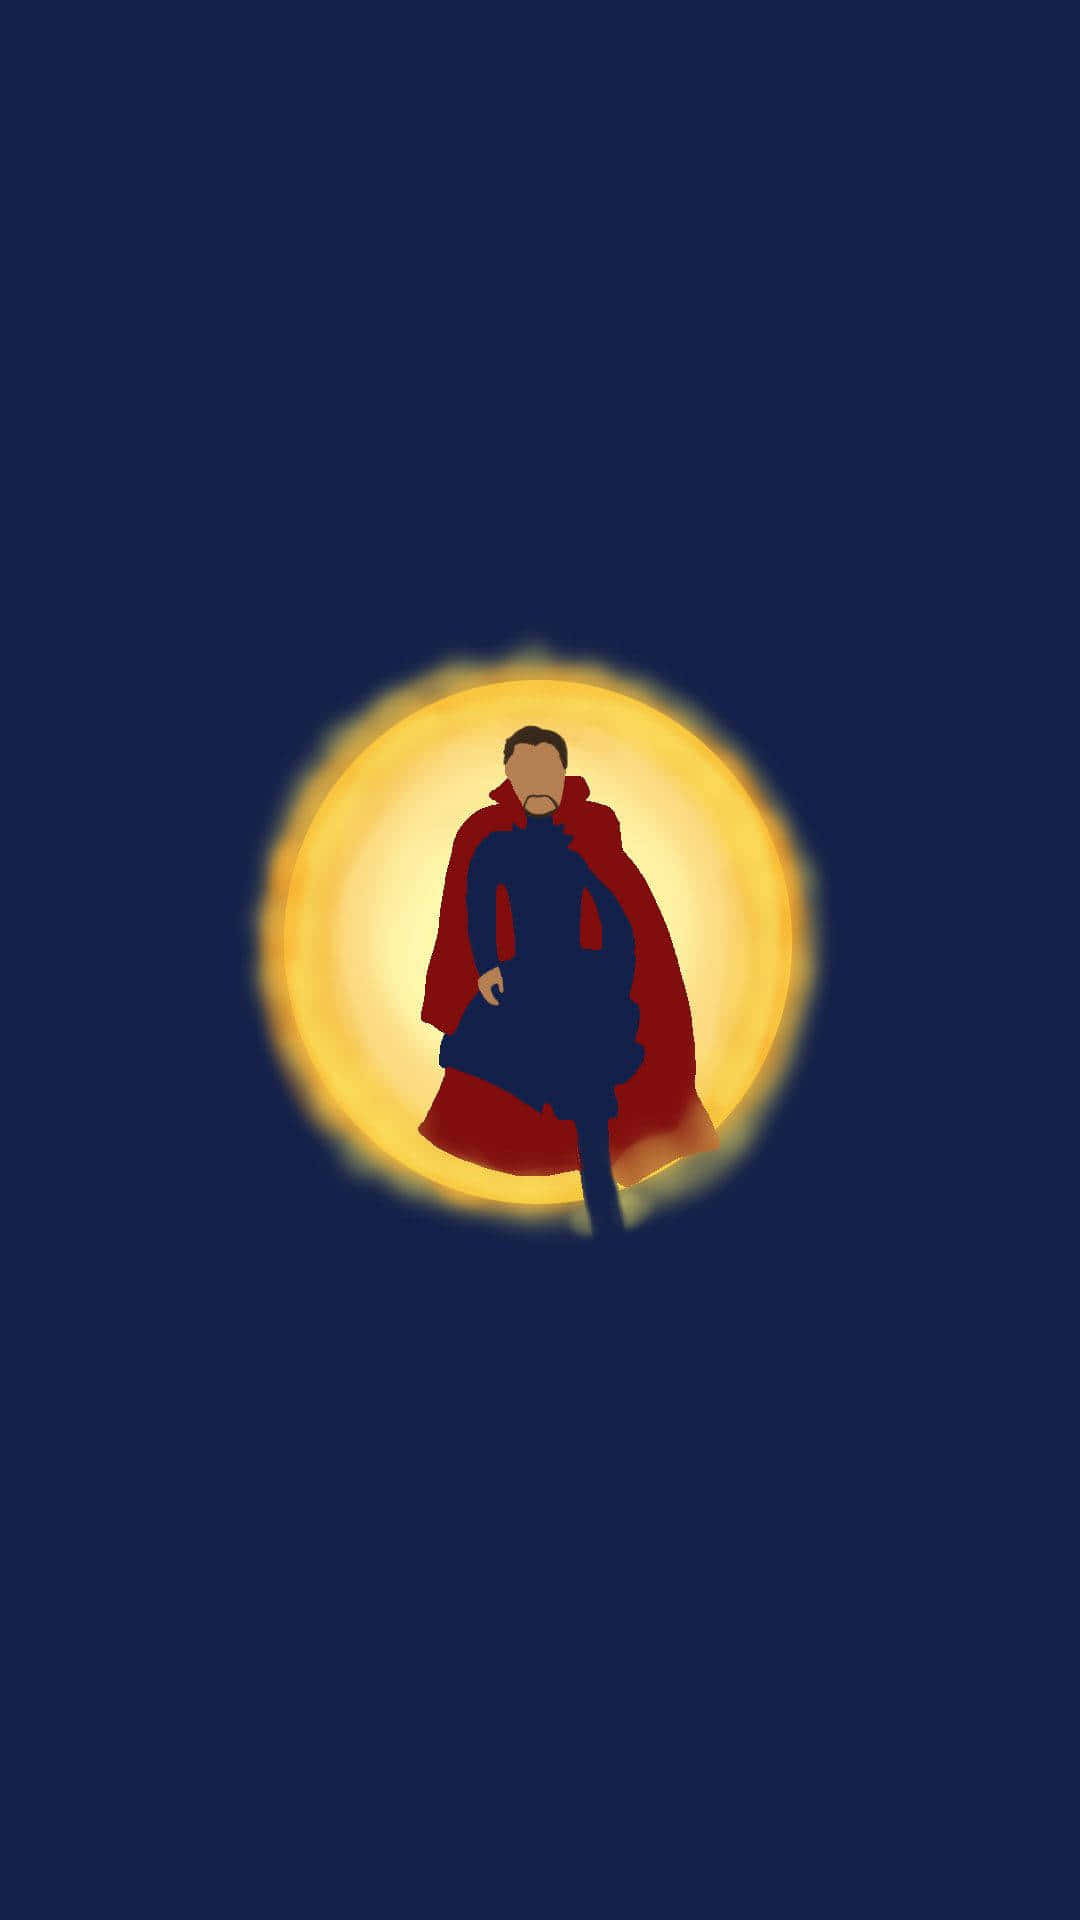 Dr Strange watches over the world with his powerful magical abilities